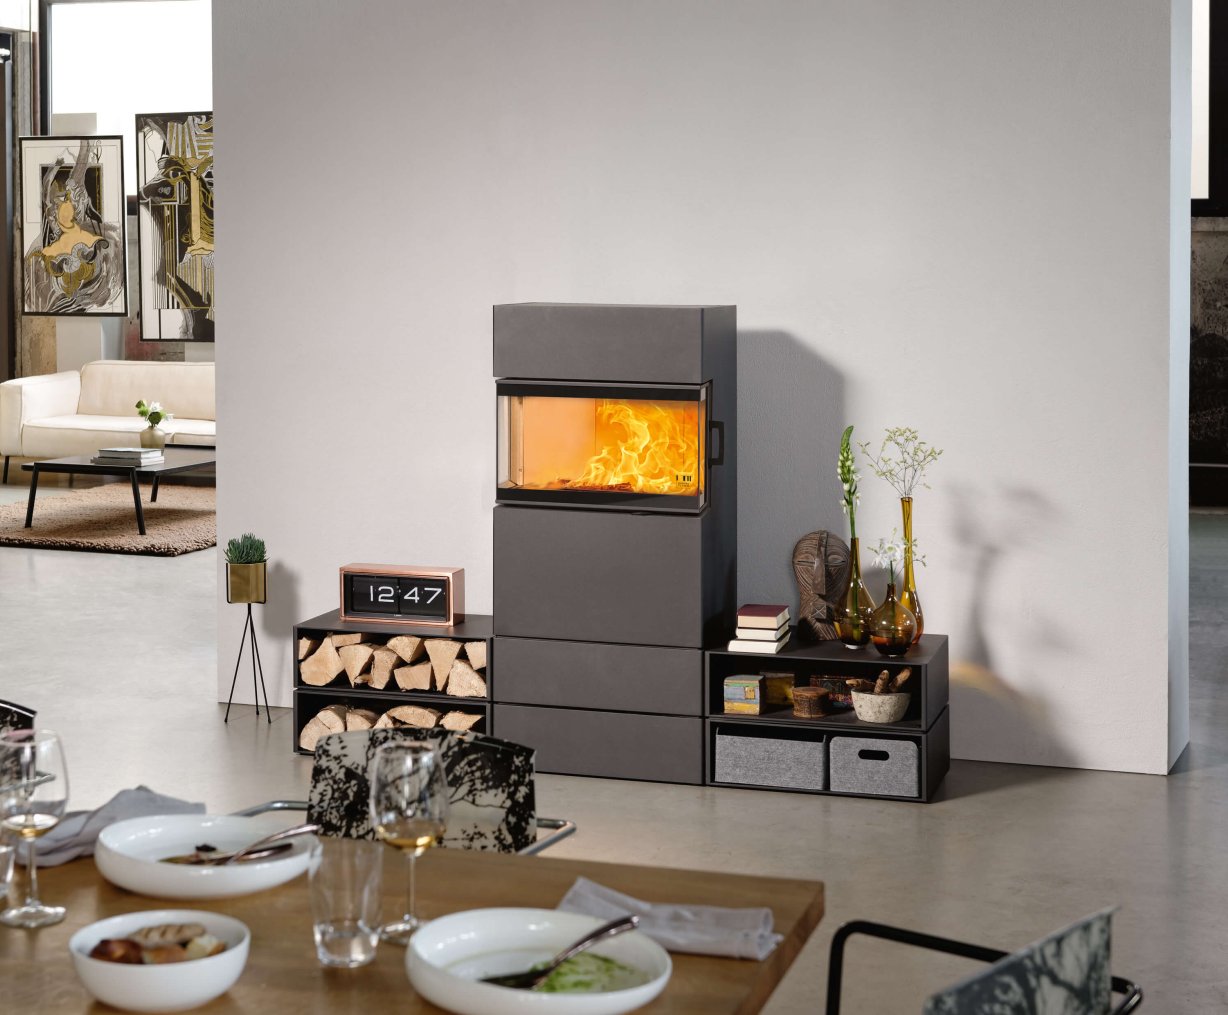 Dexter S3 stove ambiance dining room